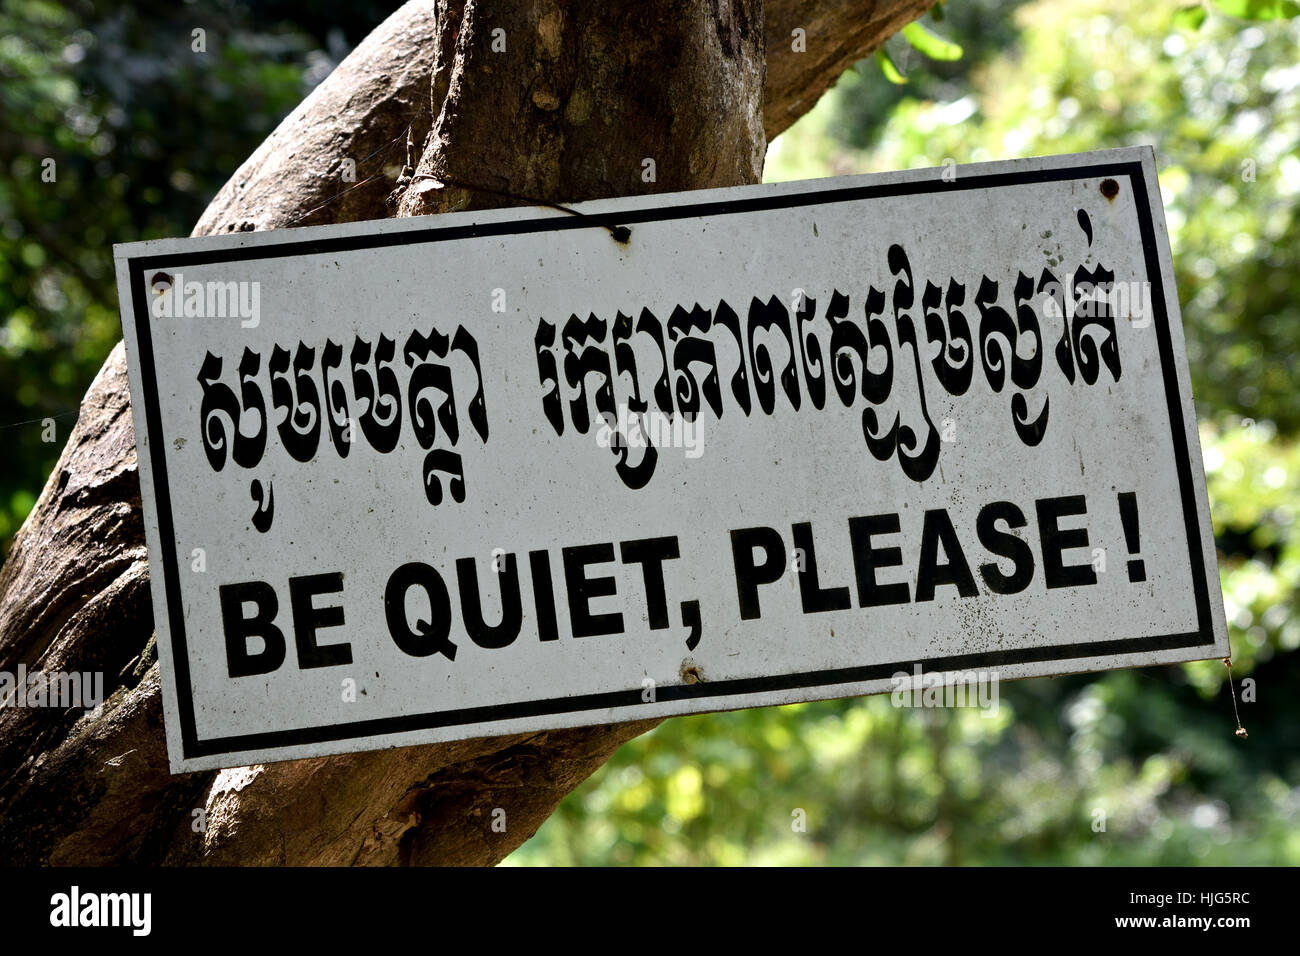 Be Quiet Please - Memorial Site The Killing Fields - Choeung Ek Museum of Cambodia  ( Mass grave of victims by Pol Pot - Khmer Rouge  from 1963 - 1997. ) Phnom Penh Cambodia Stock Photo